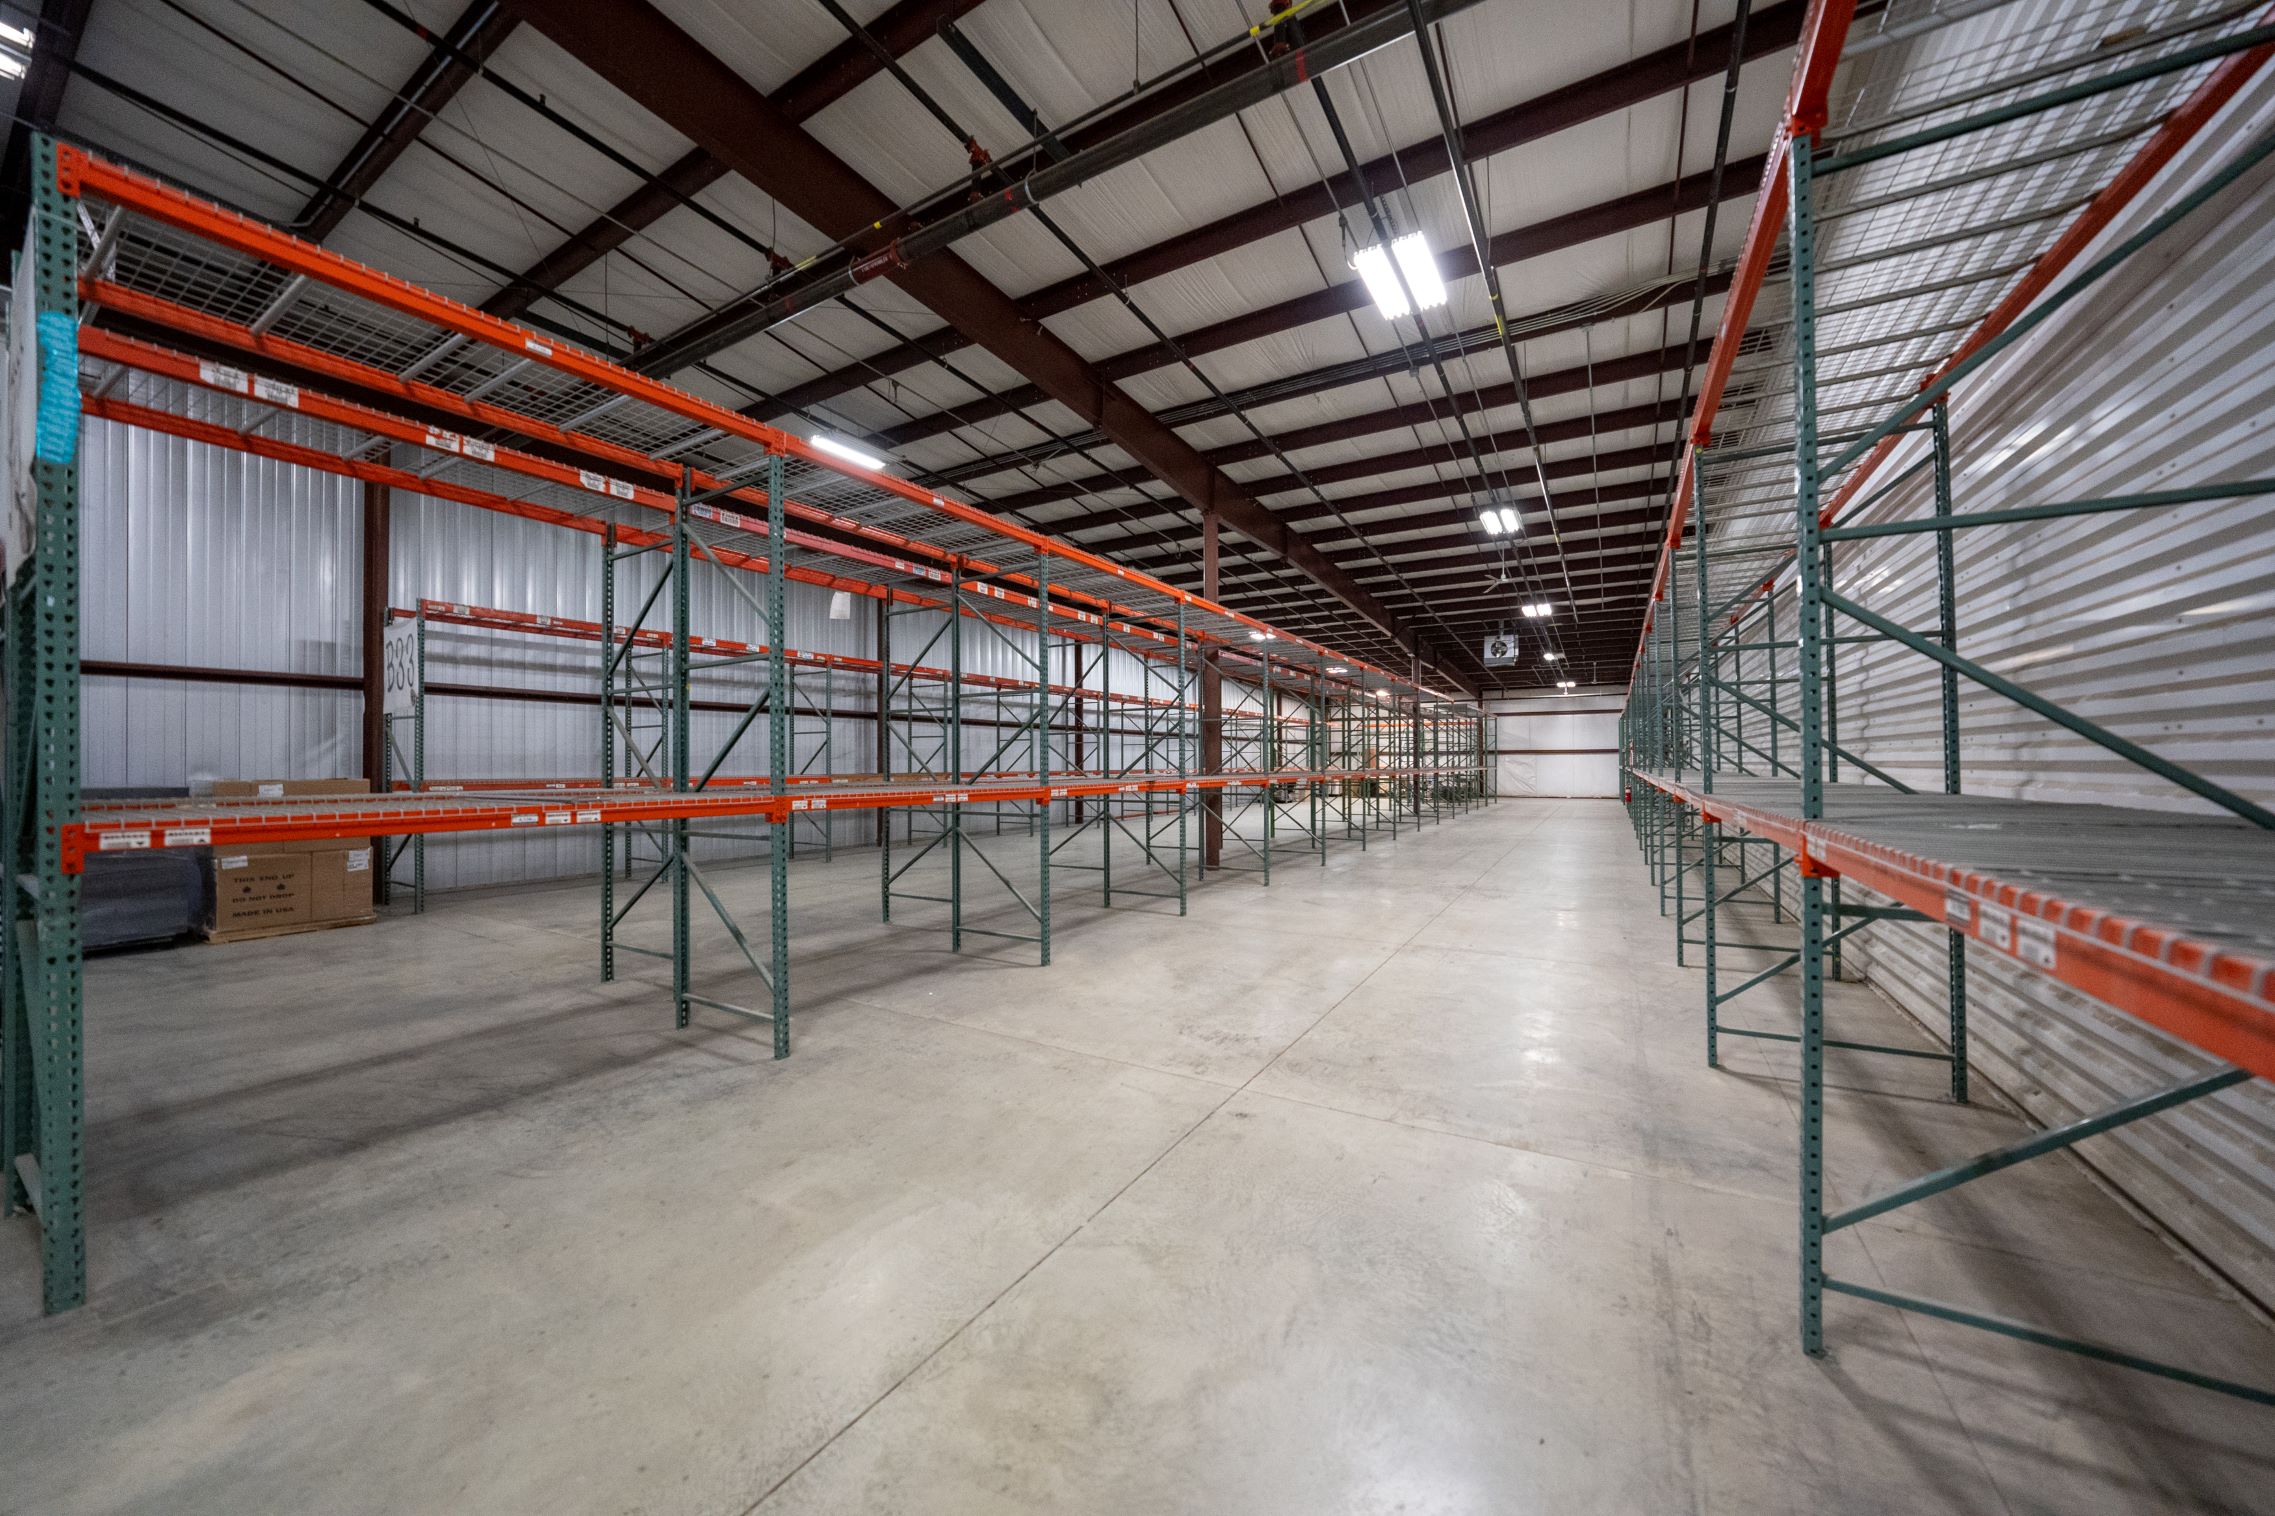 Storage racks colored orange and green in a large warehouse area in Northeast Indiana.